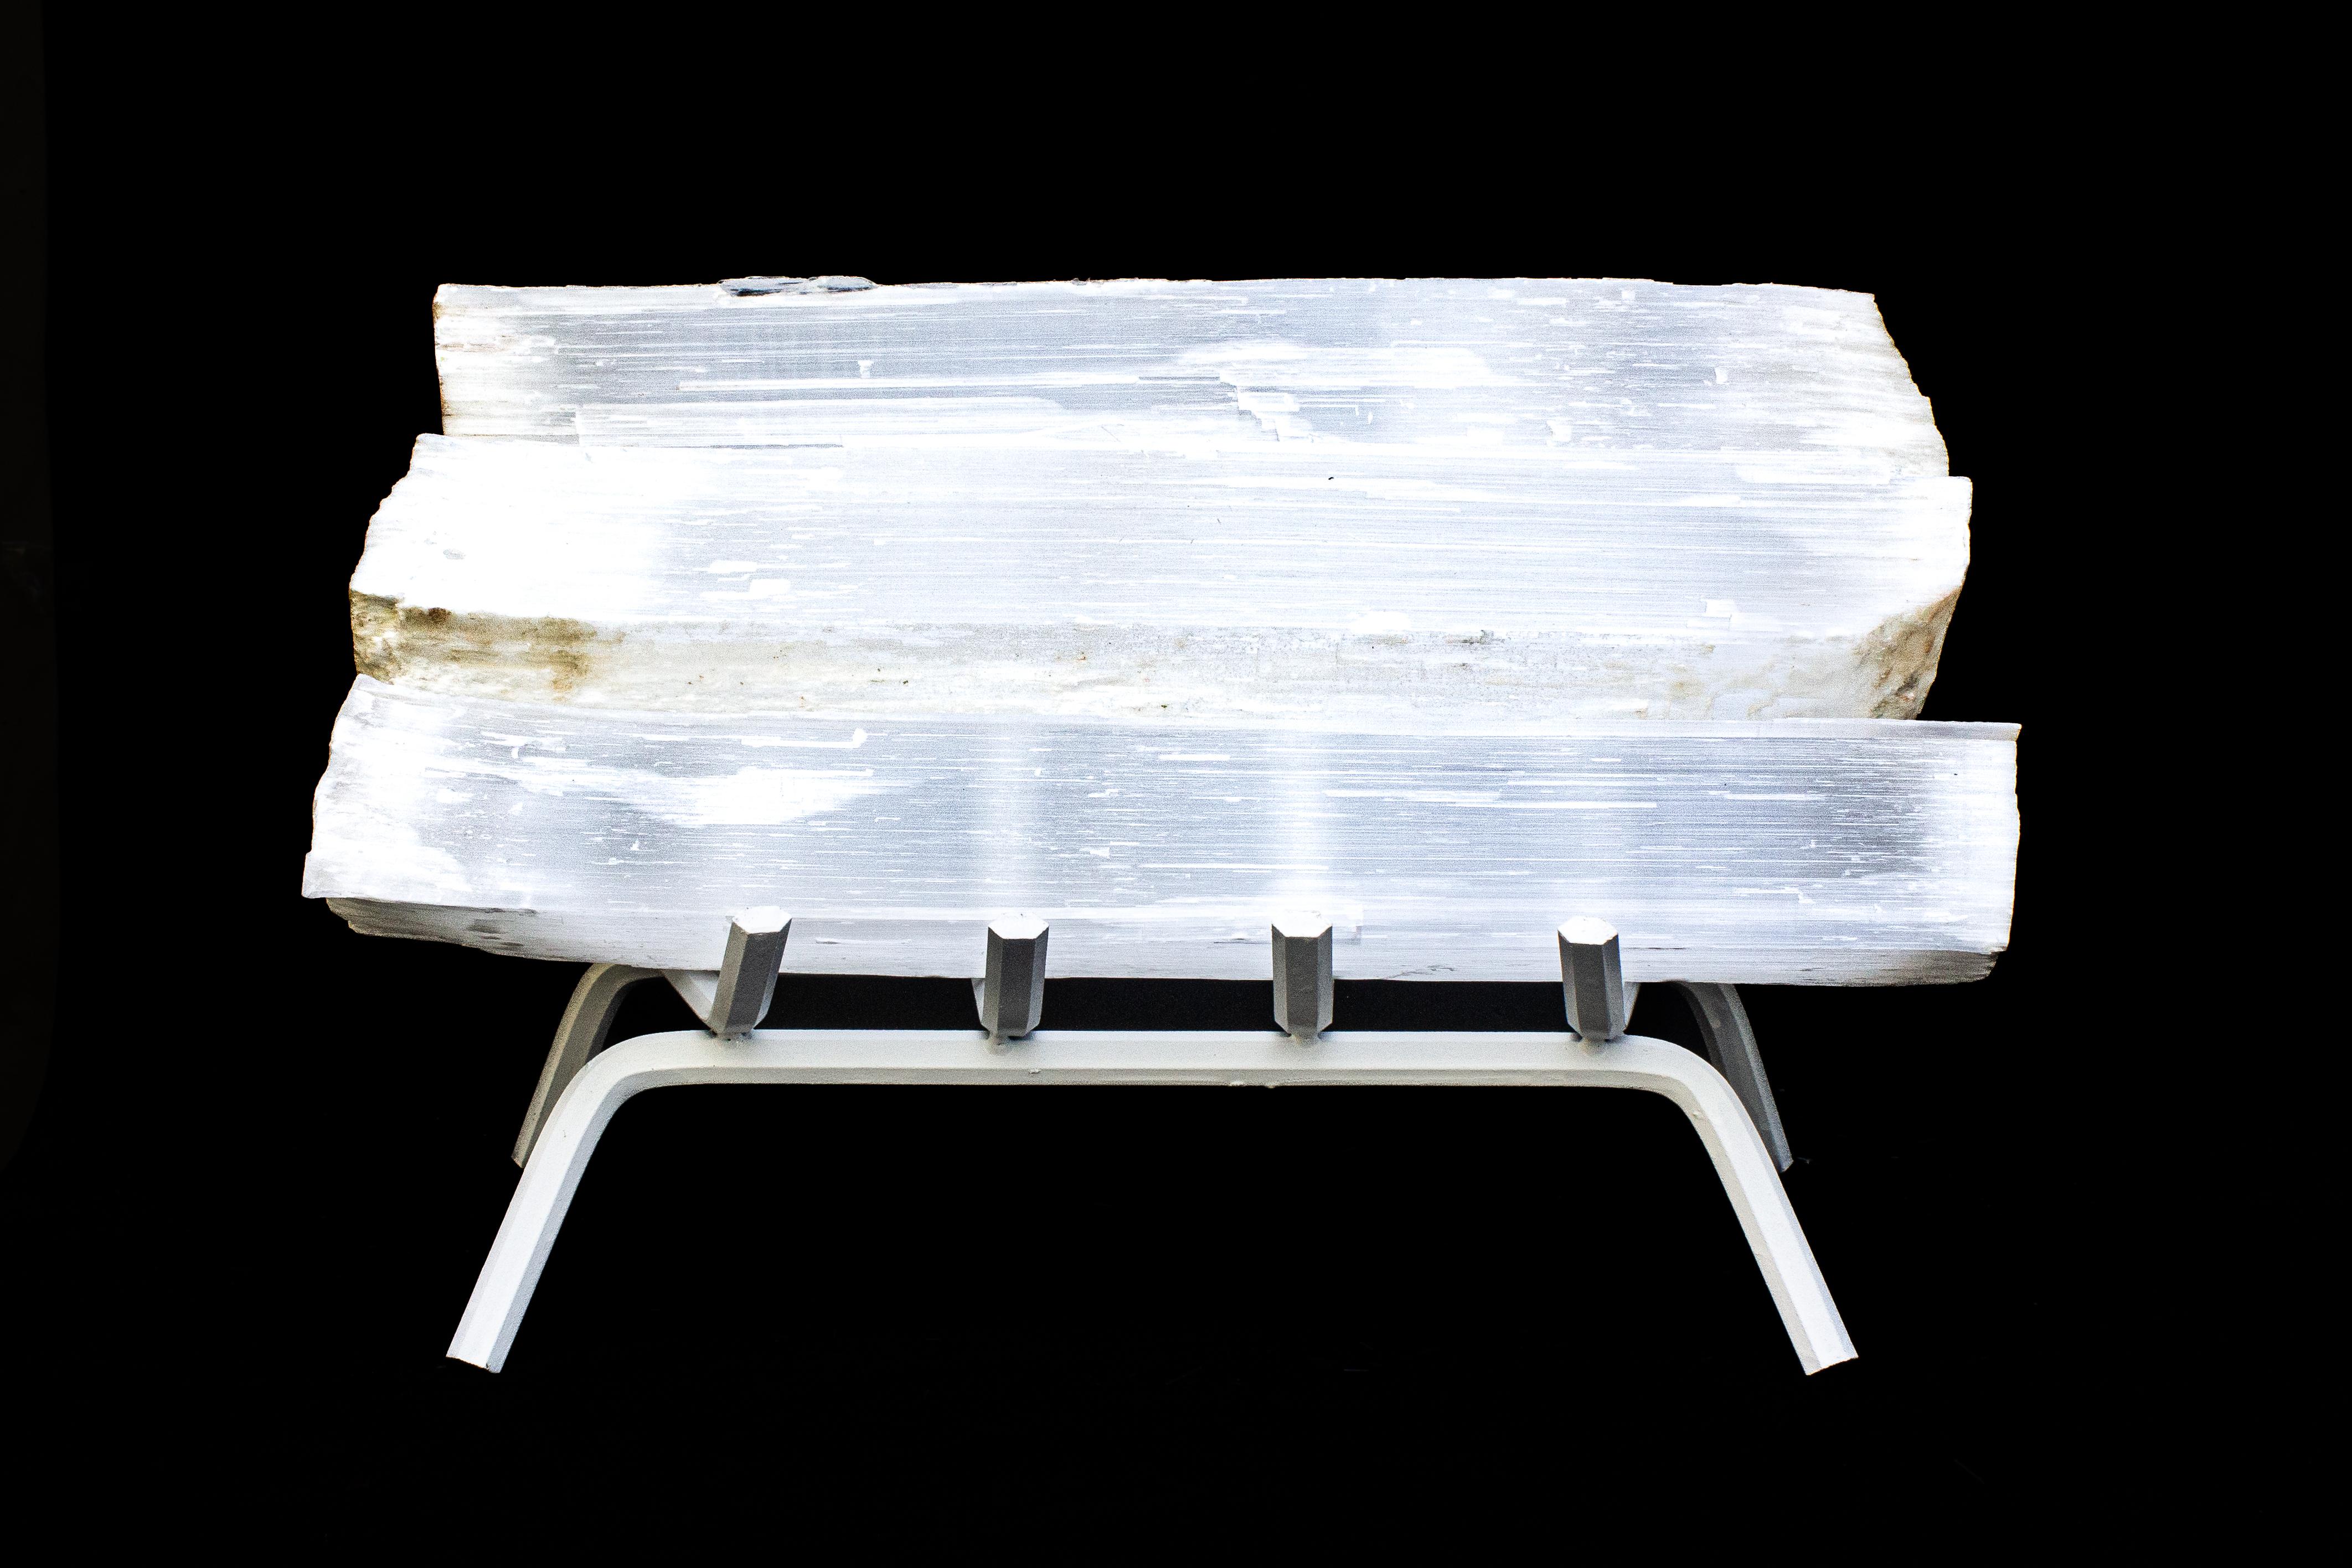 Set of four selenite logs or ruler selenite with a white fireplace grate.

Selenite logs are single, prismatic selenite crystals from Morocco that were formed in extensive beds by the evaporation of ocean brine. This mineral is characterized by a